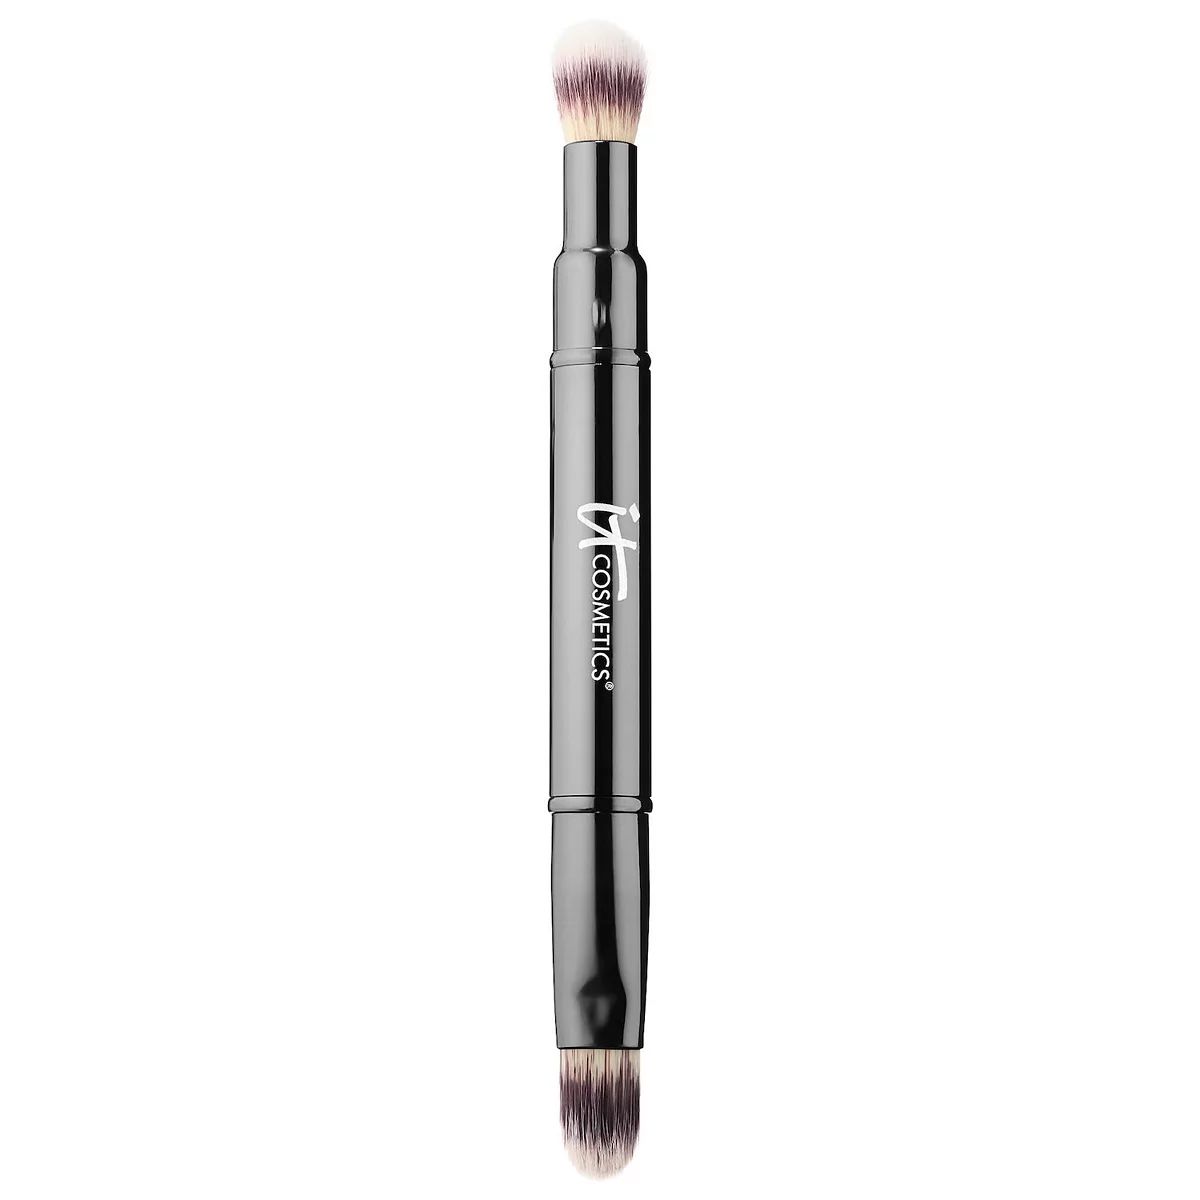 IT Cosmetics Heavenly Luxe Dual Airbrush Concealer Brush #2 | Kohl's